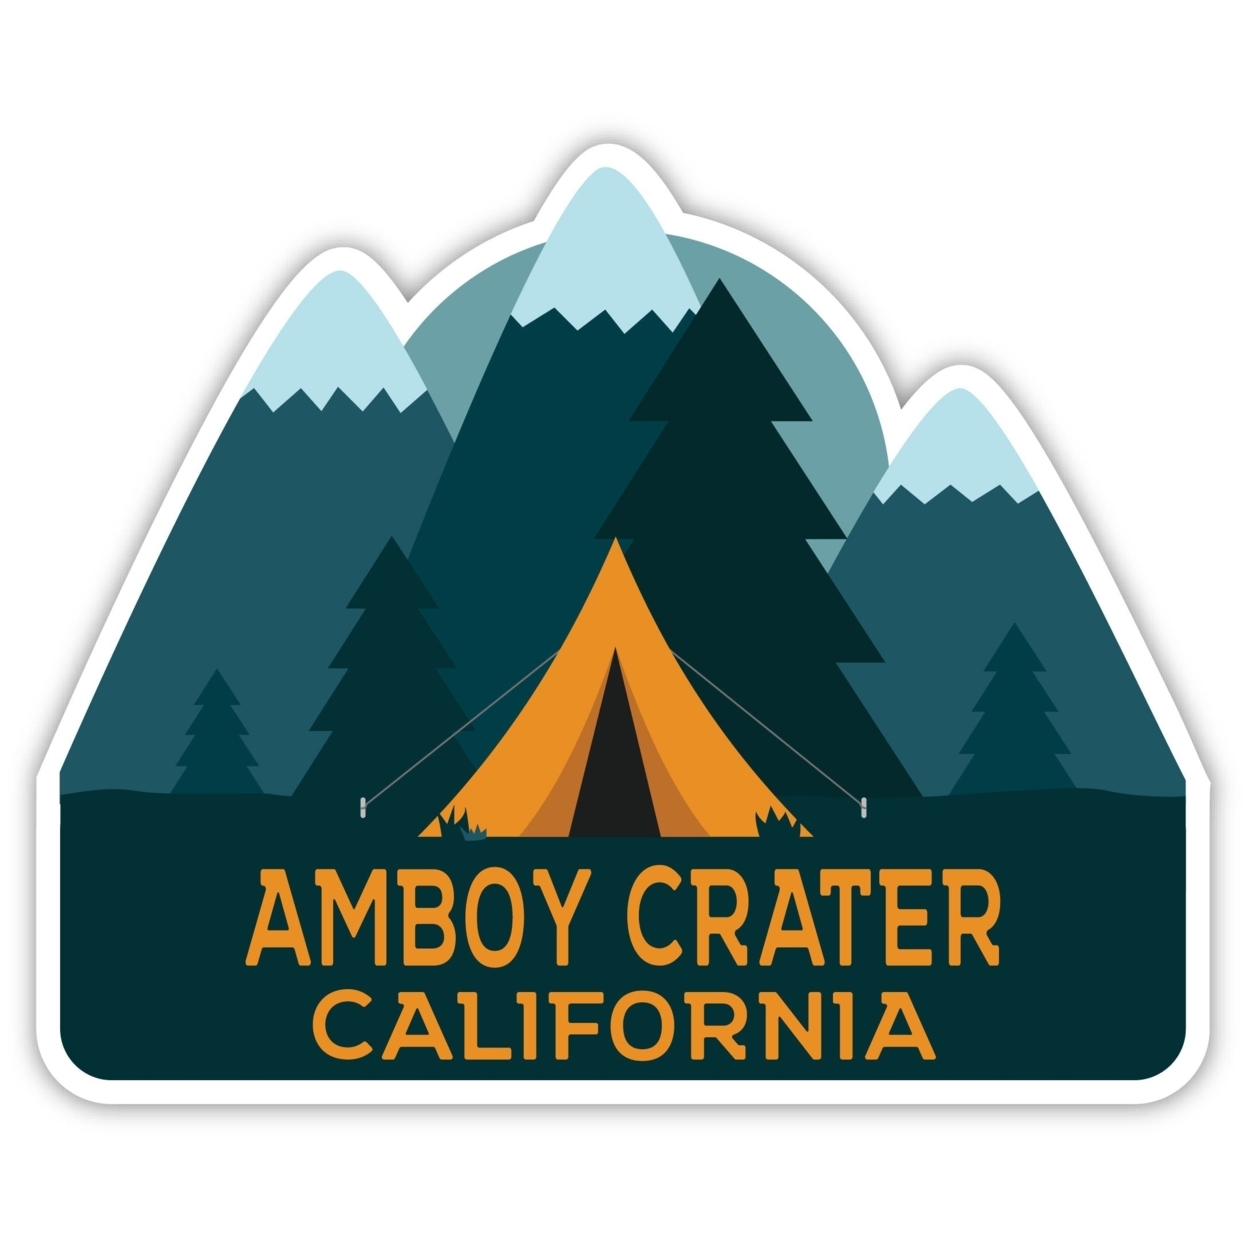 Amboy Crater California Souvenir Decorative Stickers (Choose Theme And Size) - 4-Pack, 12-Inch, Tent